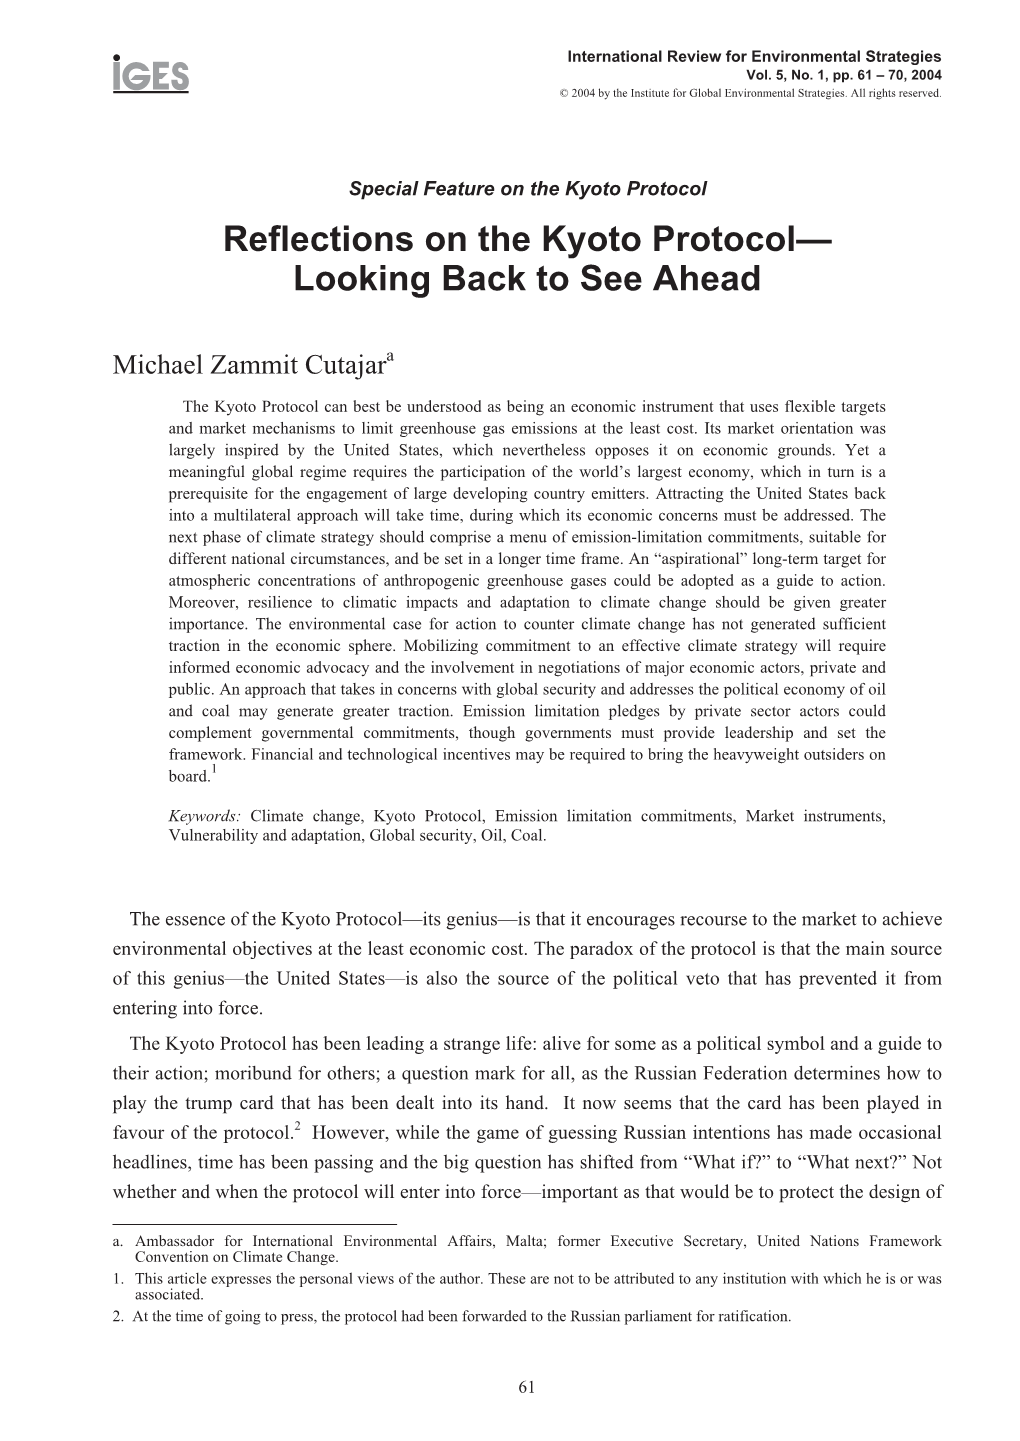 Reflections on the Kyoto Protocol— Looking Back to See Ahead